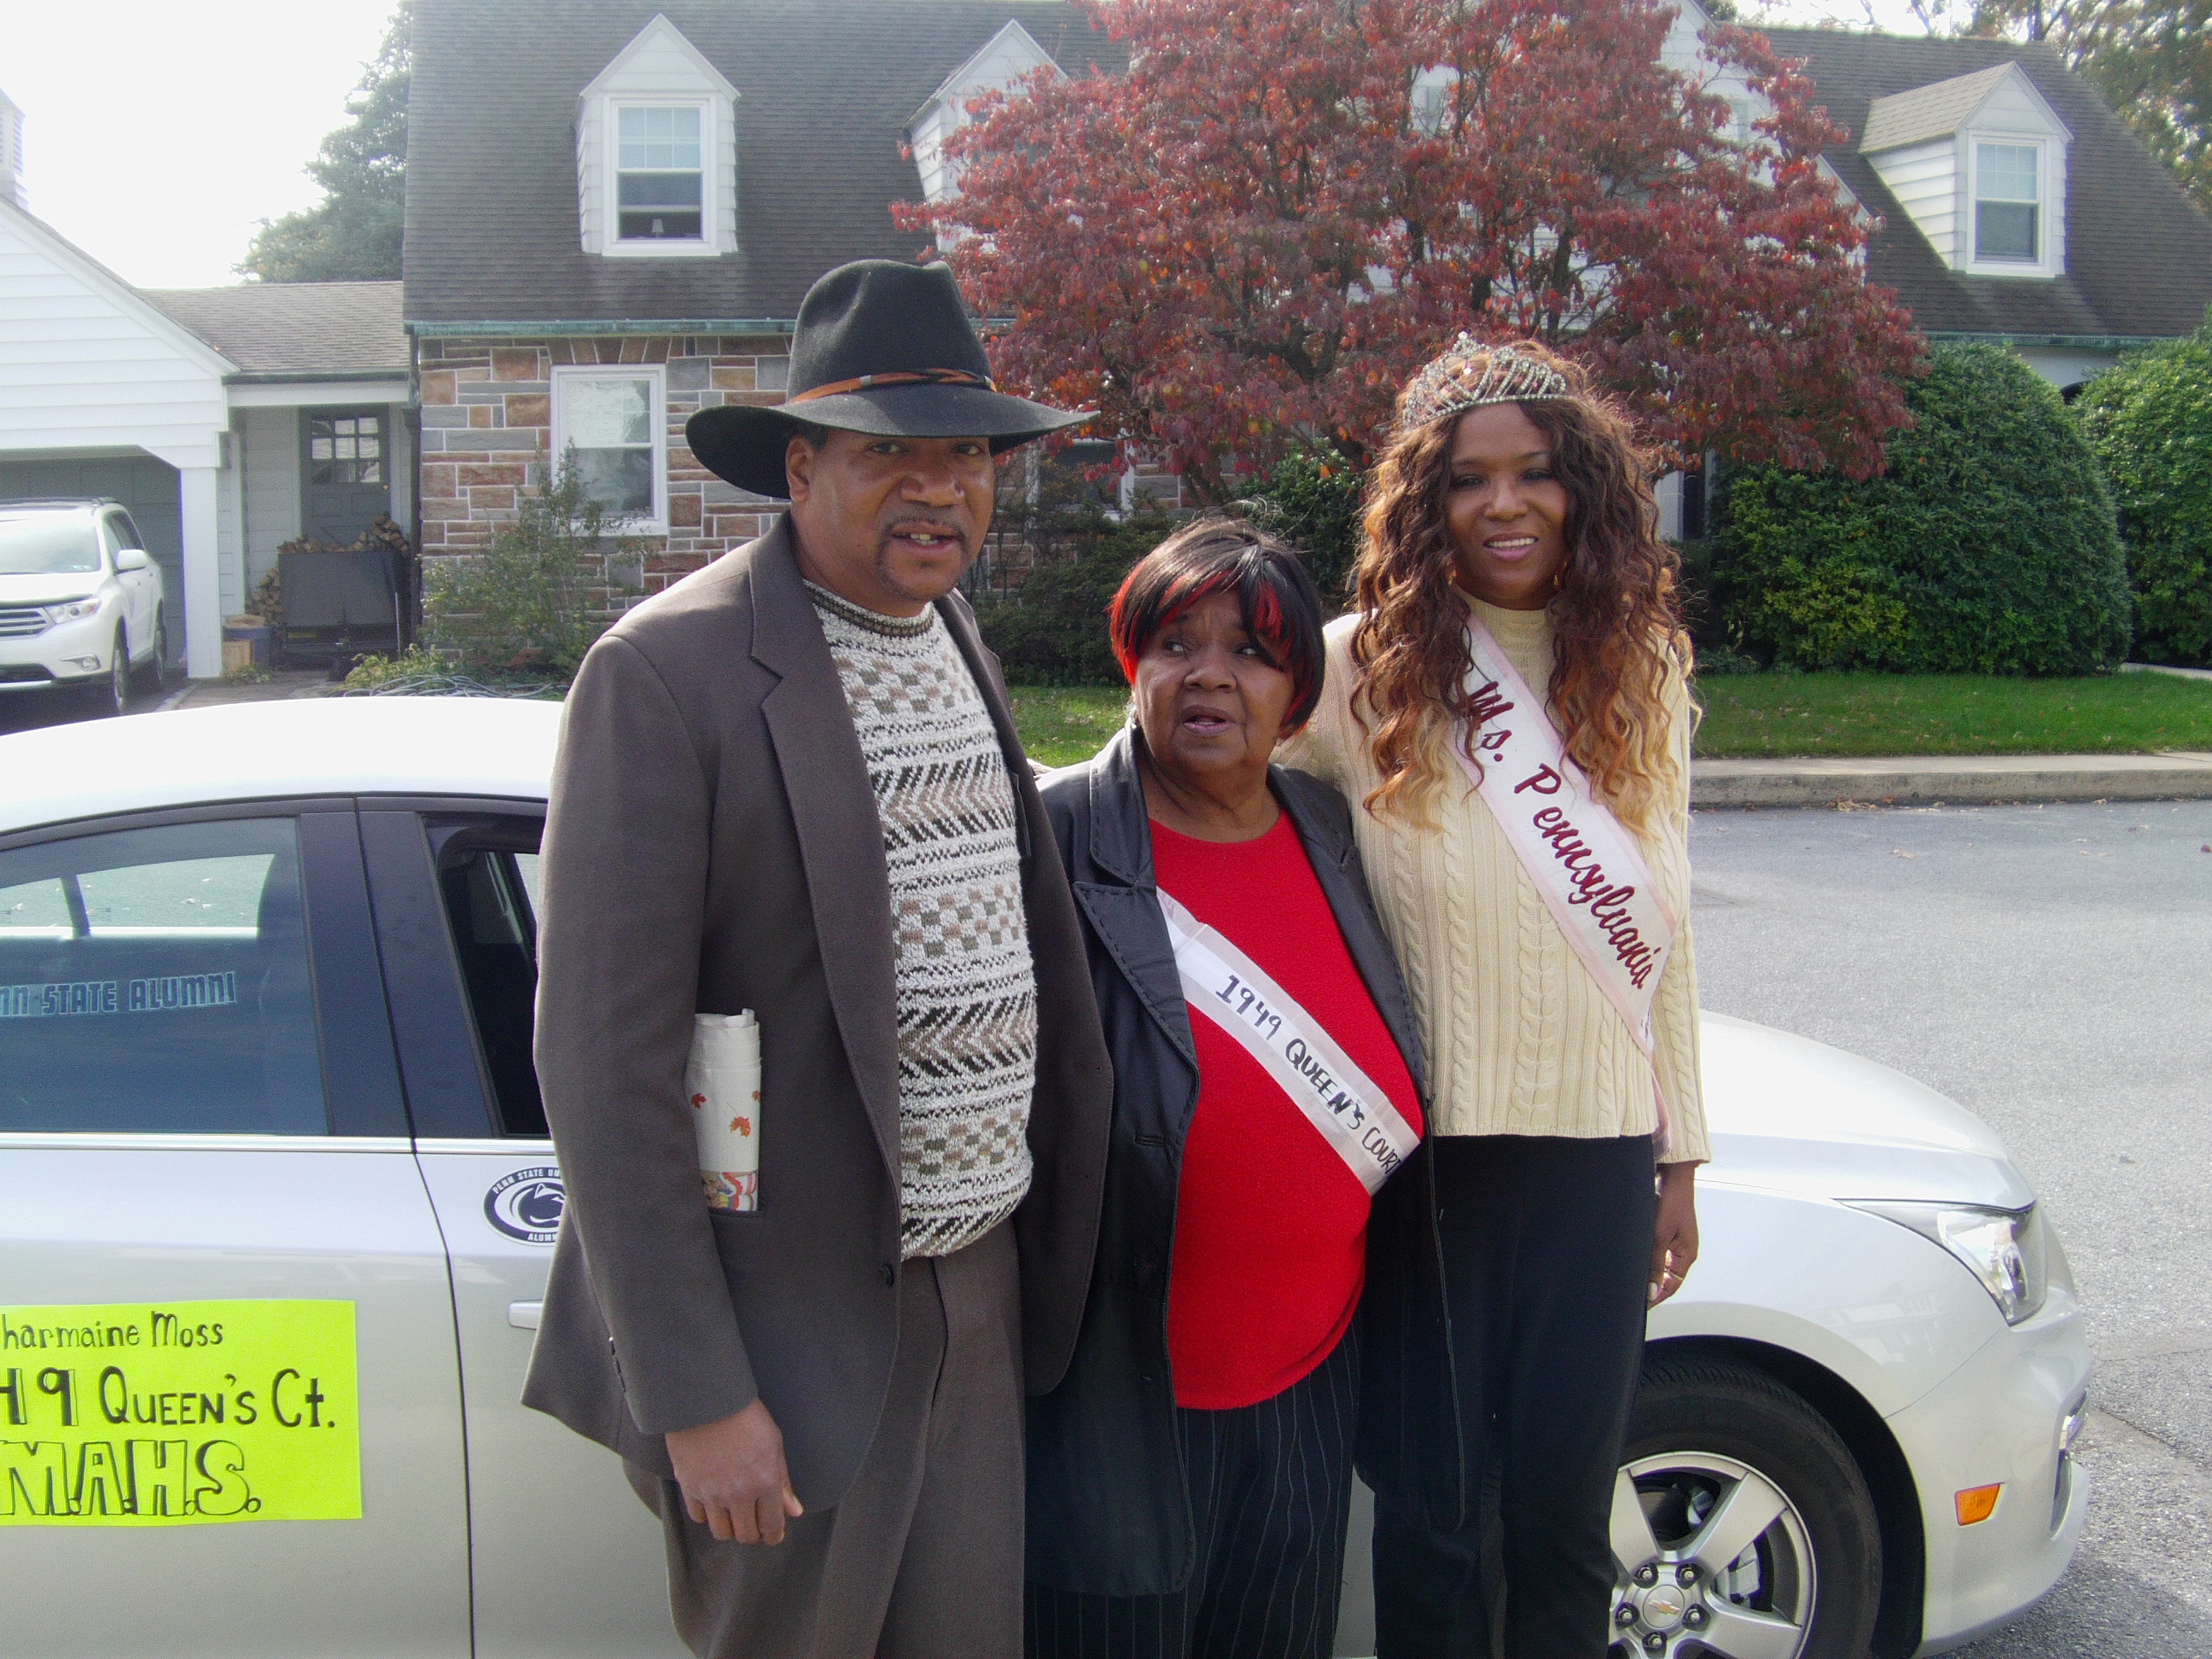 Ms.Pennsylvania 2004 Maria Frisby, 1949 Queen's Court Attendant Charmaine Moss, and escort Billy Nolen in the 2015 Middetown Borough Homecoming Parade.